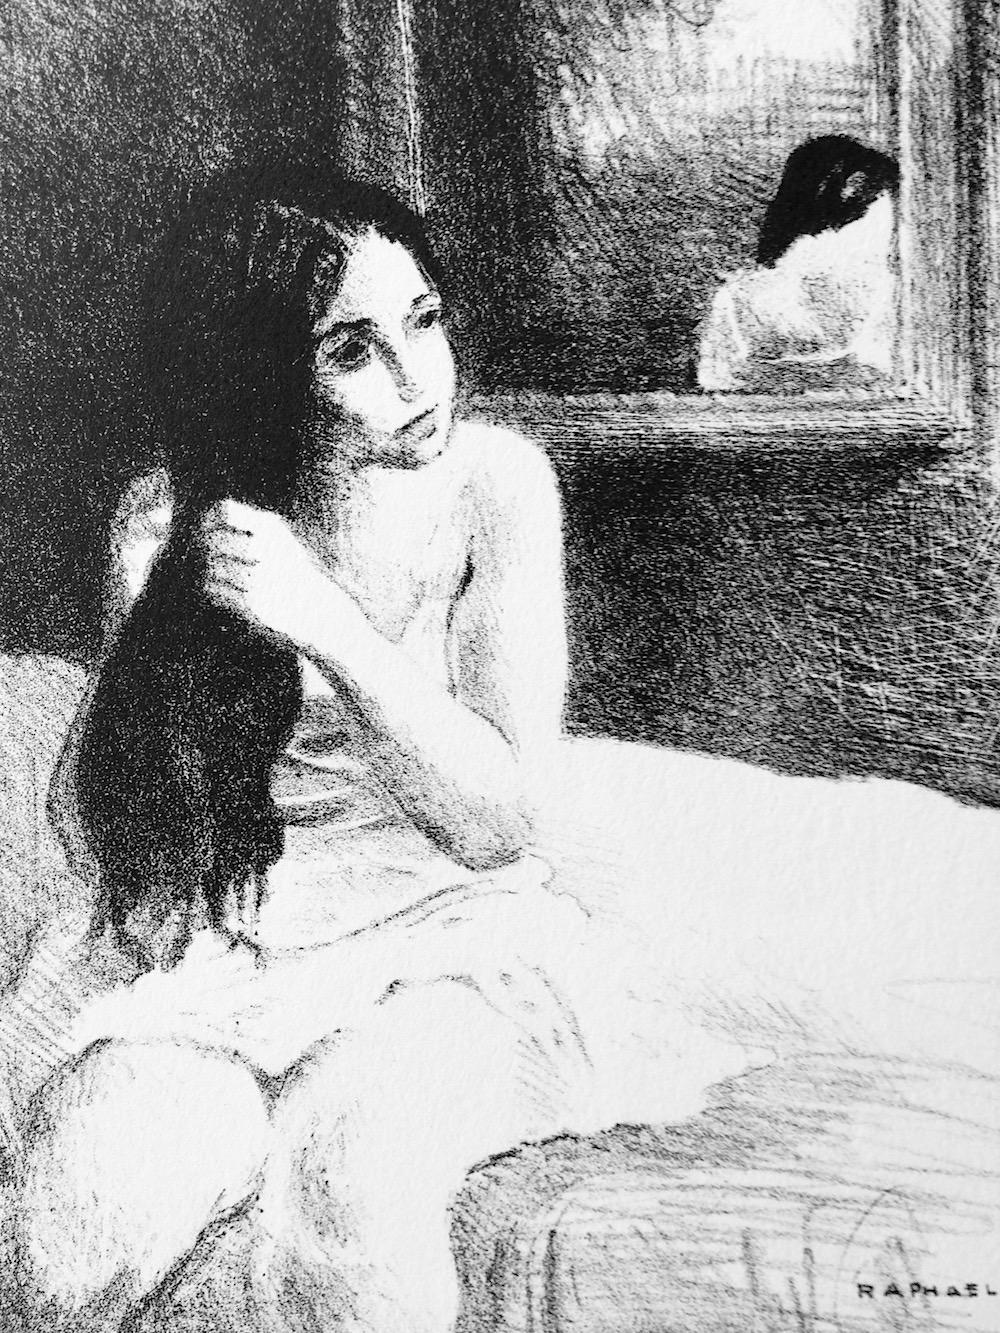 YOUNG WOMAN COMBING HER HAIR Hand Drawn Signed Lithograph, Interior Portrait - Print by Raphael Soyer